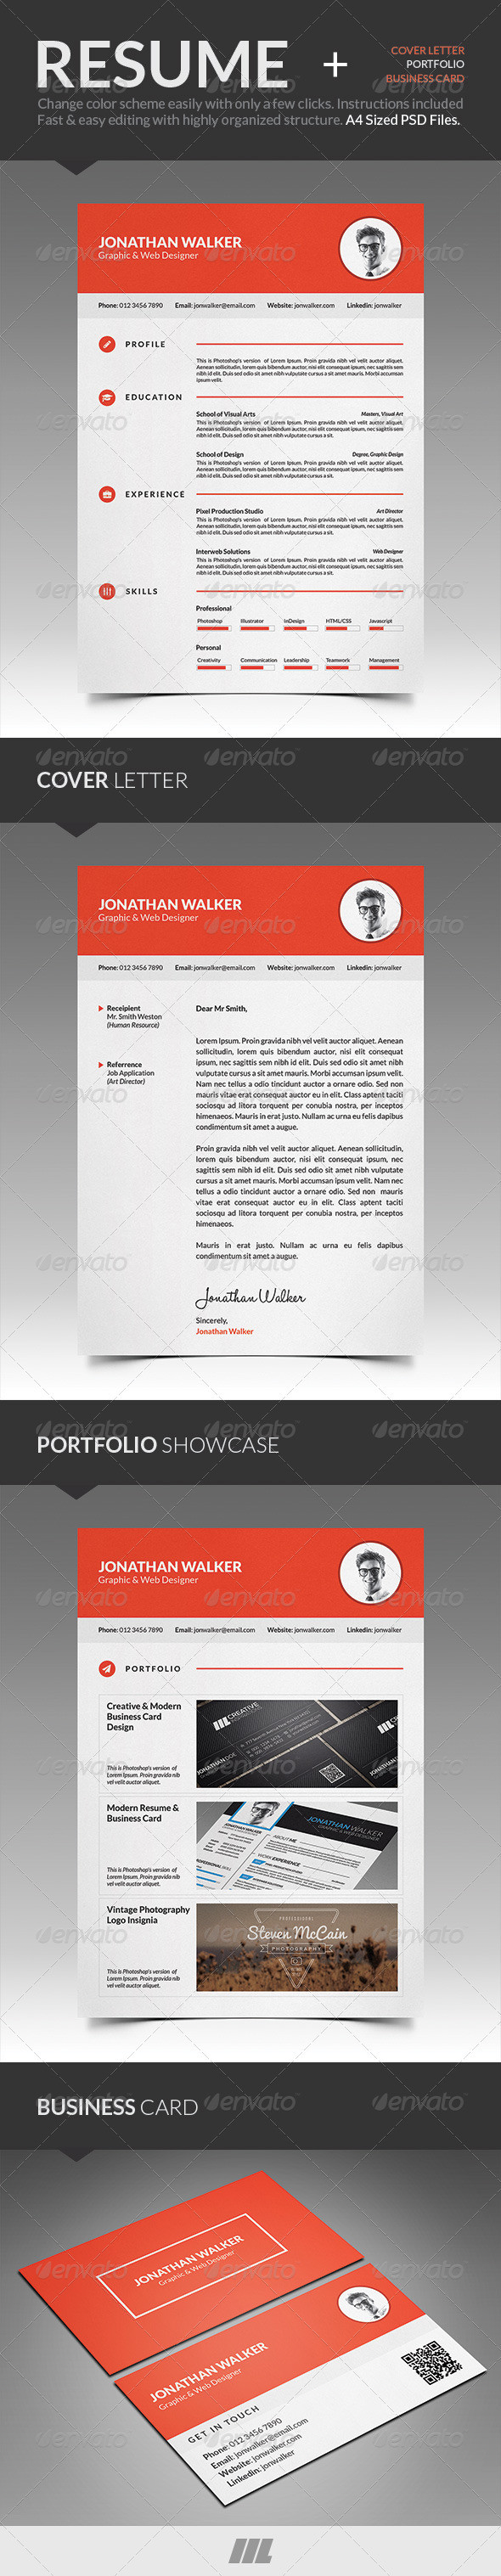 02 clean professional resume 3piece with business card preview